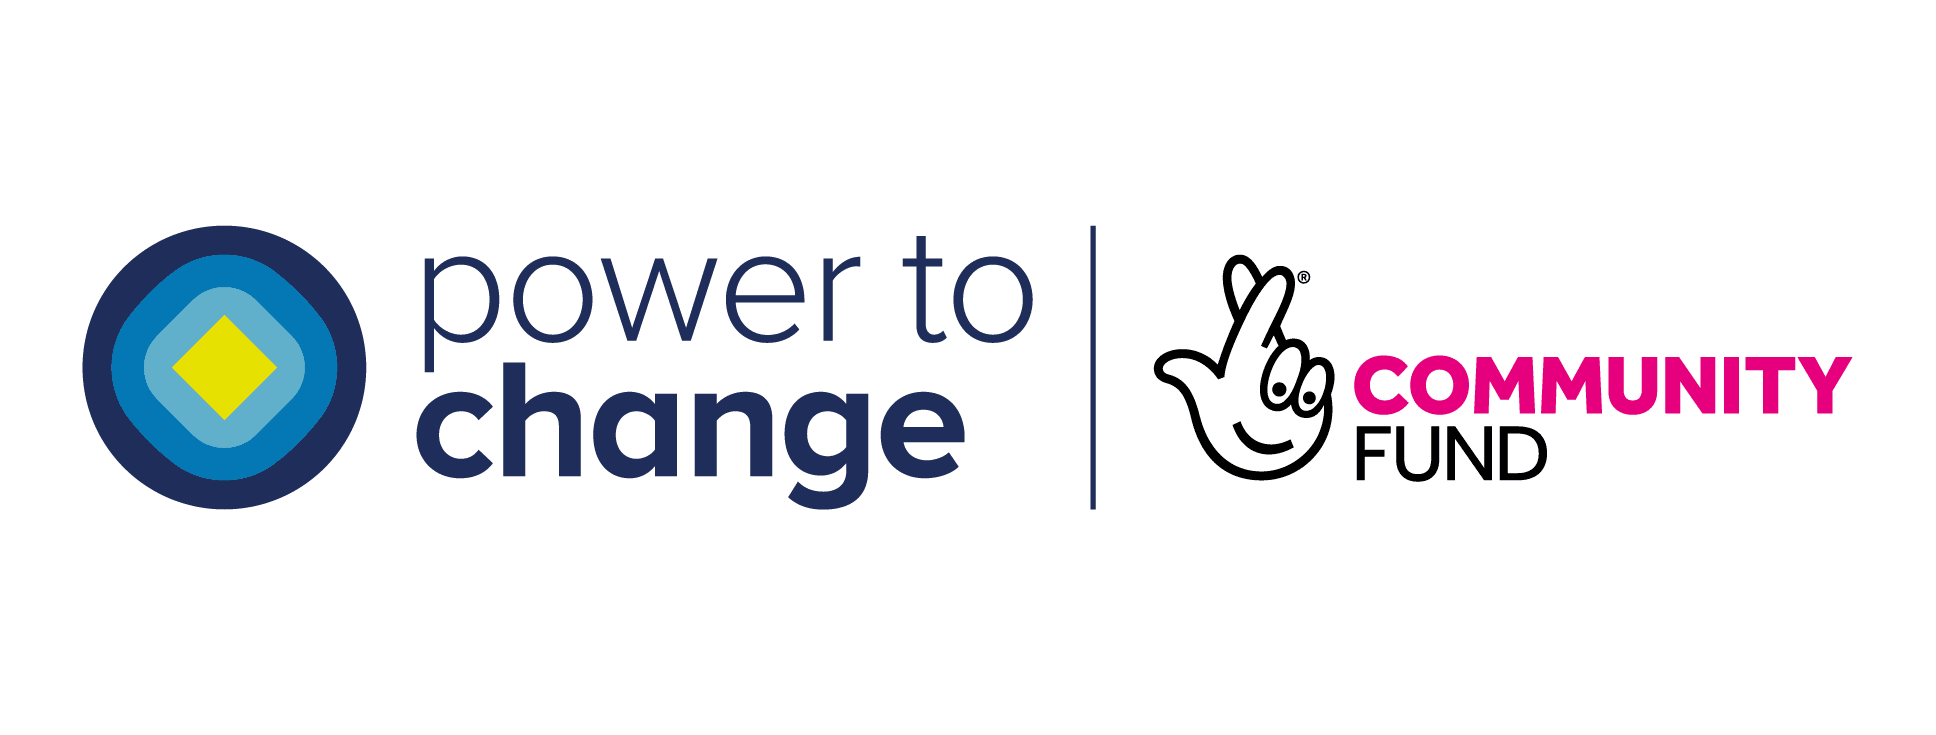 Power to Change and National Lottery Community Fund logos